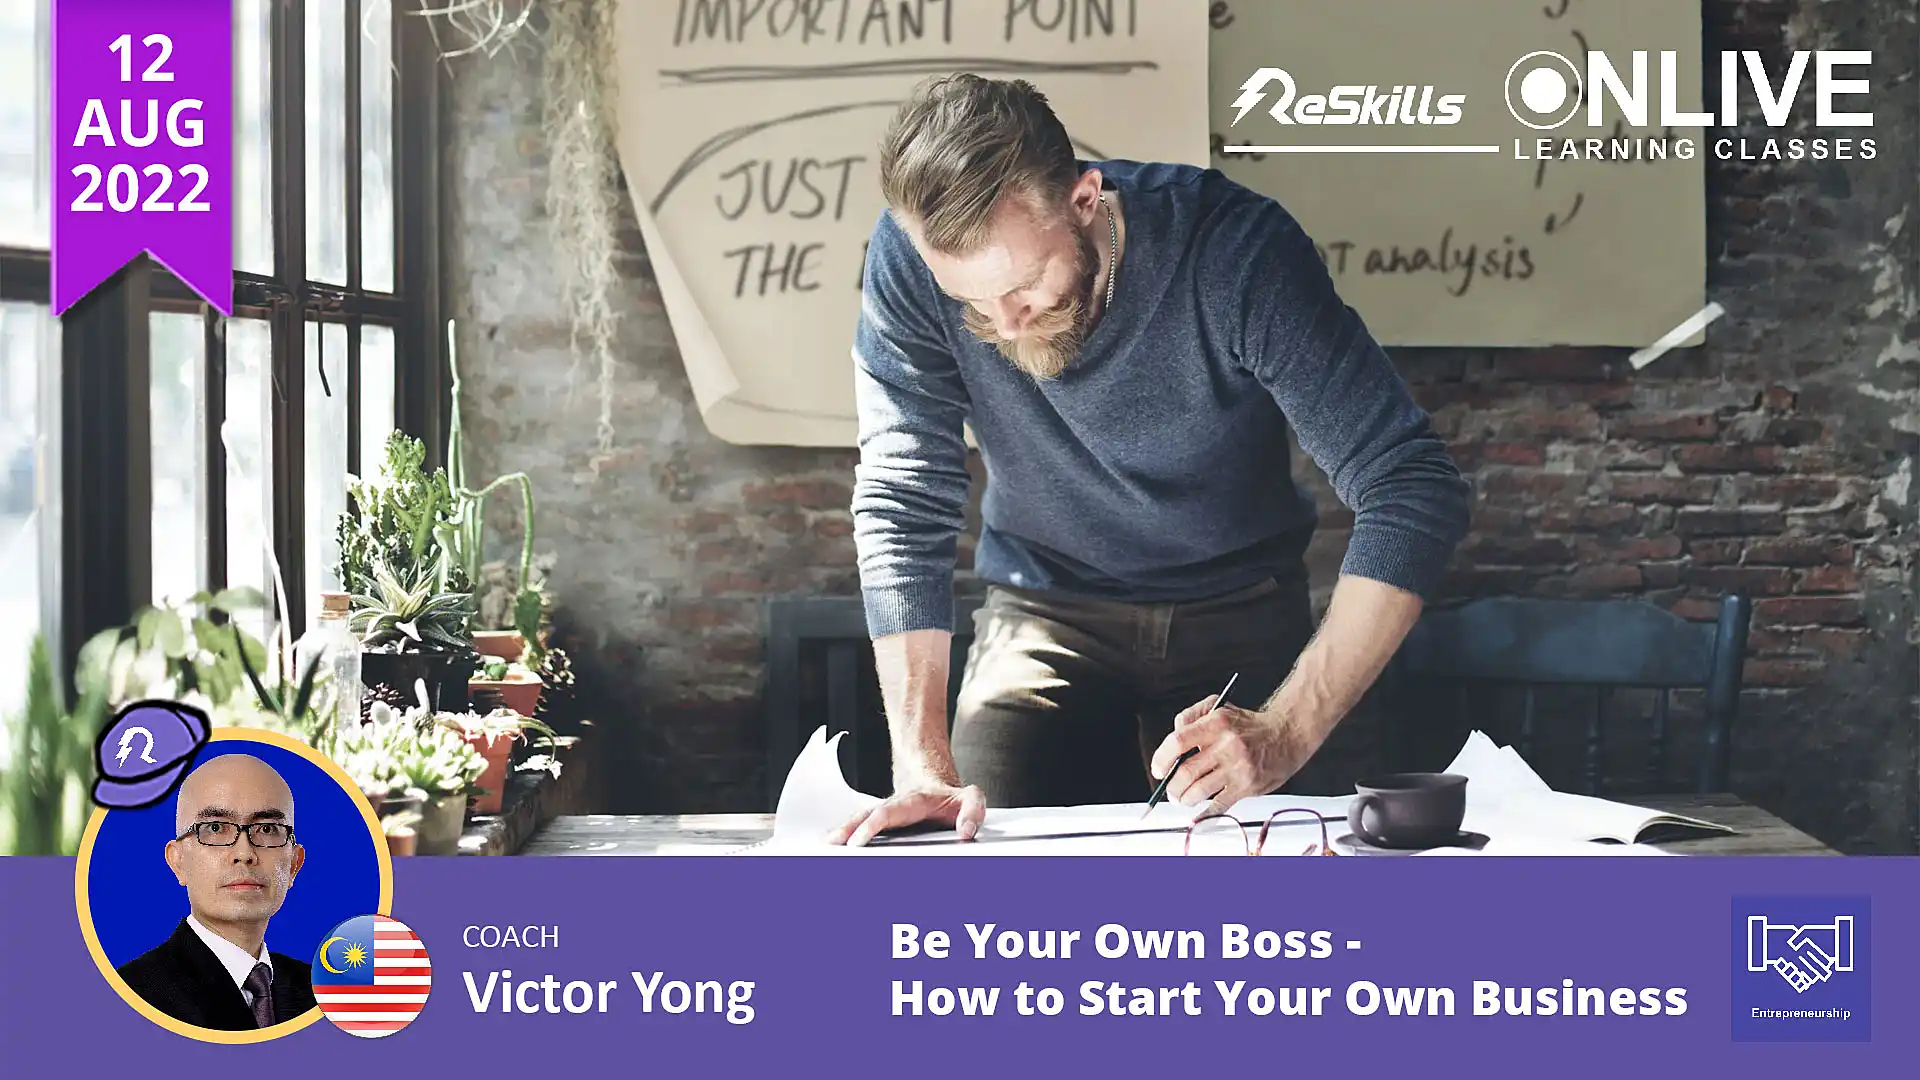 Be Your Own Boss - How to Start Your Own Business - ReSkills